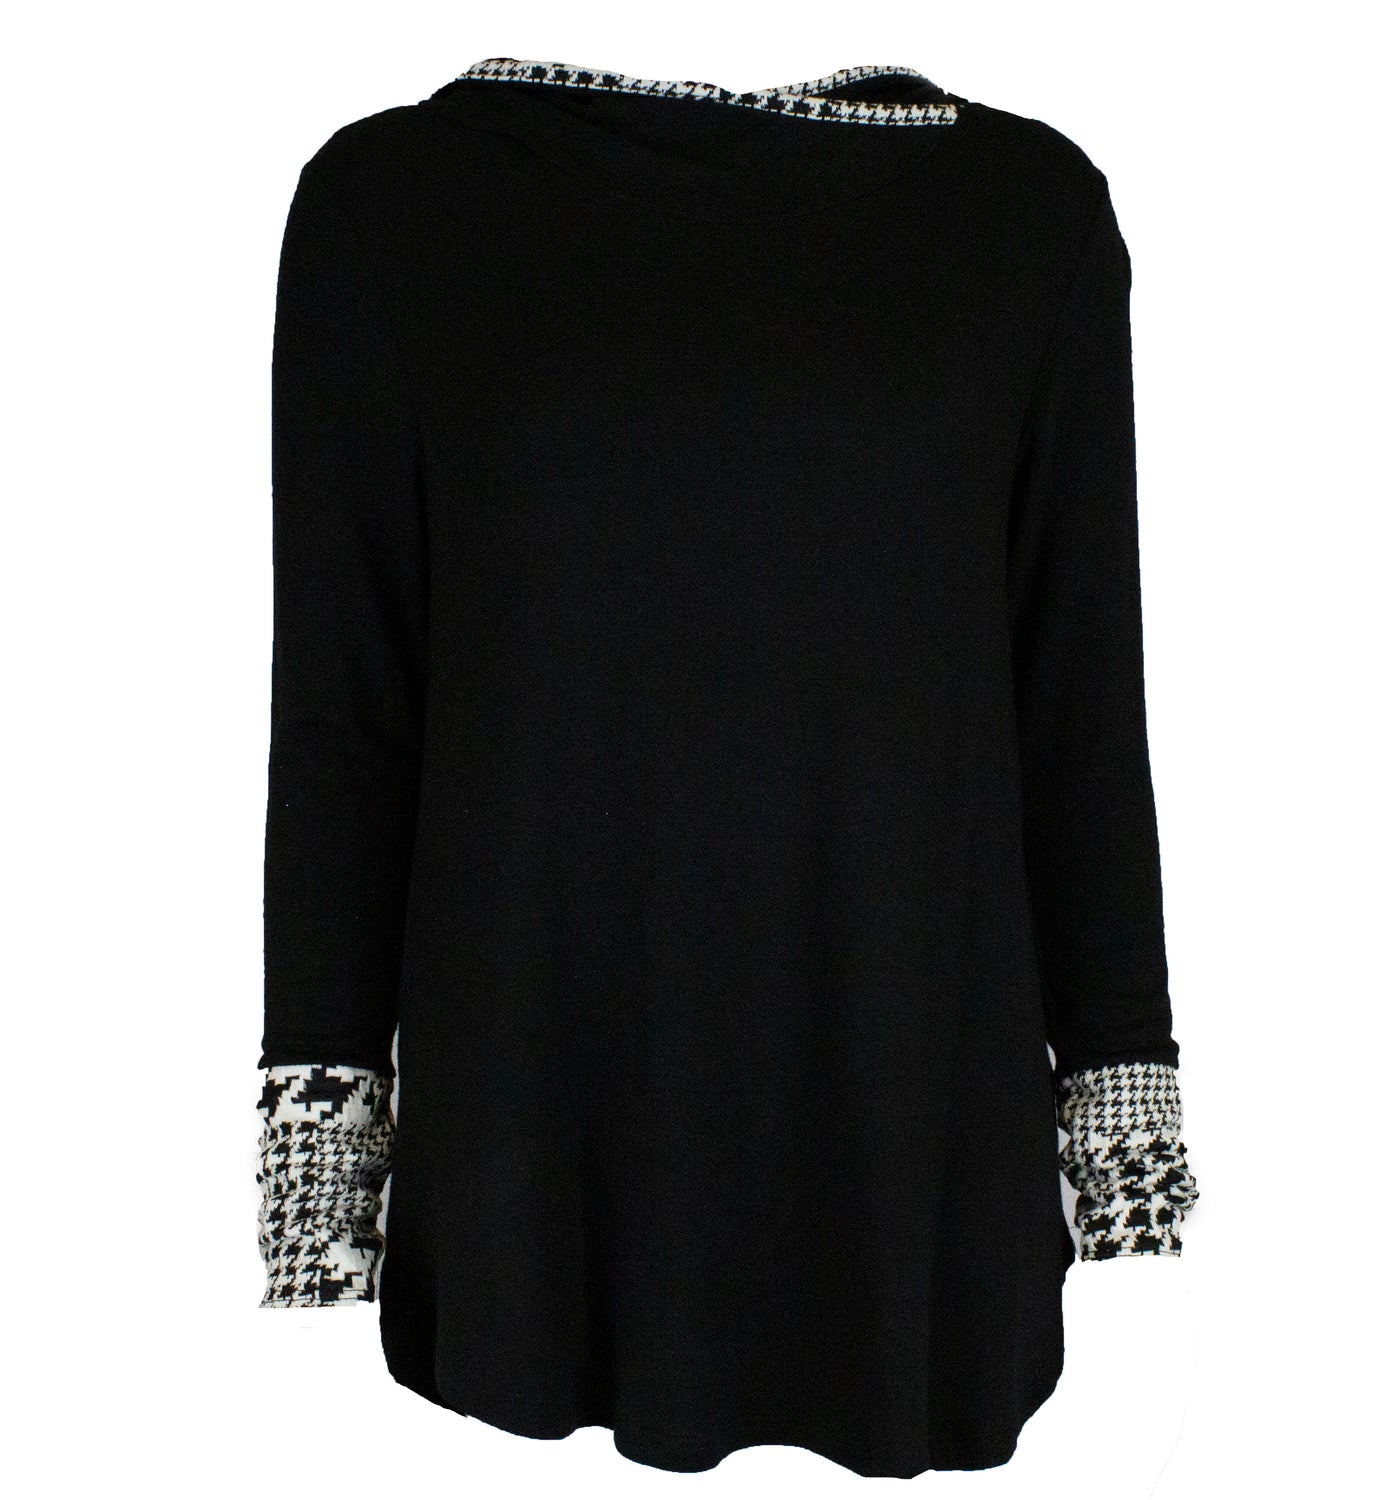 lightweight black sweater with a hood and white and black detailing on the sleeves